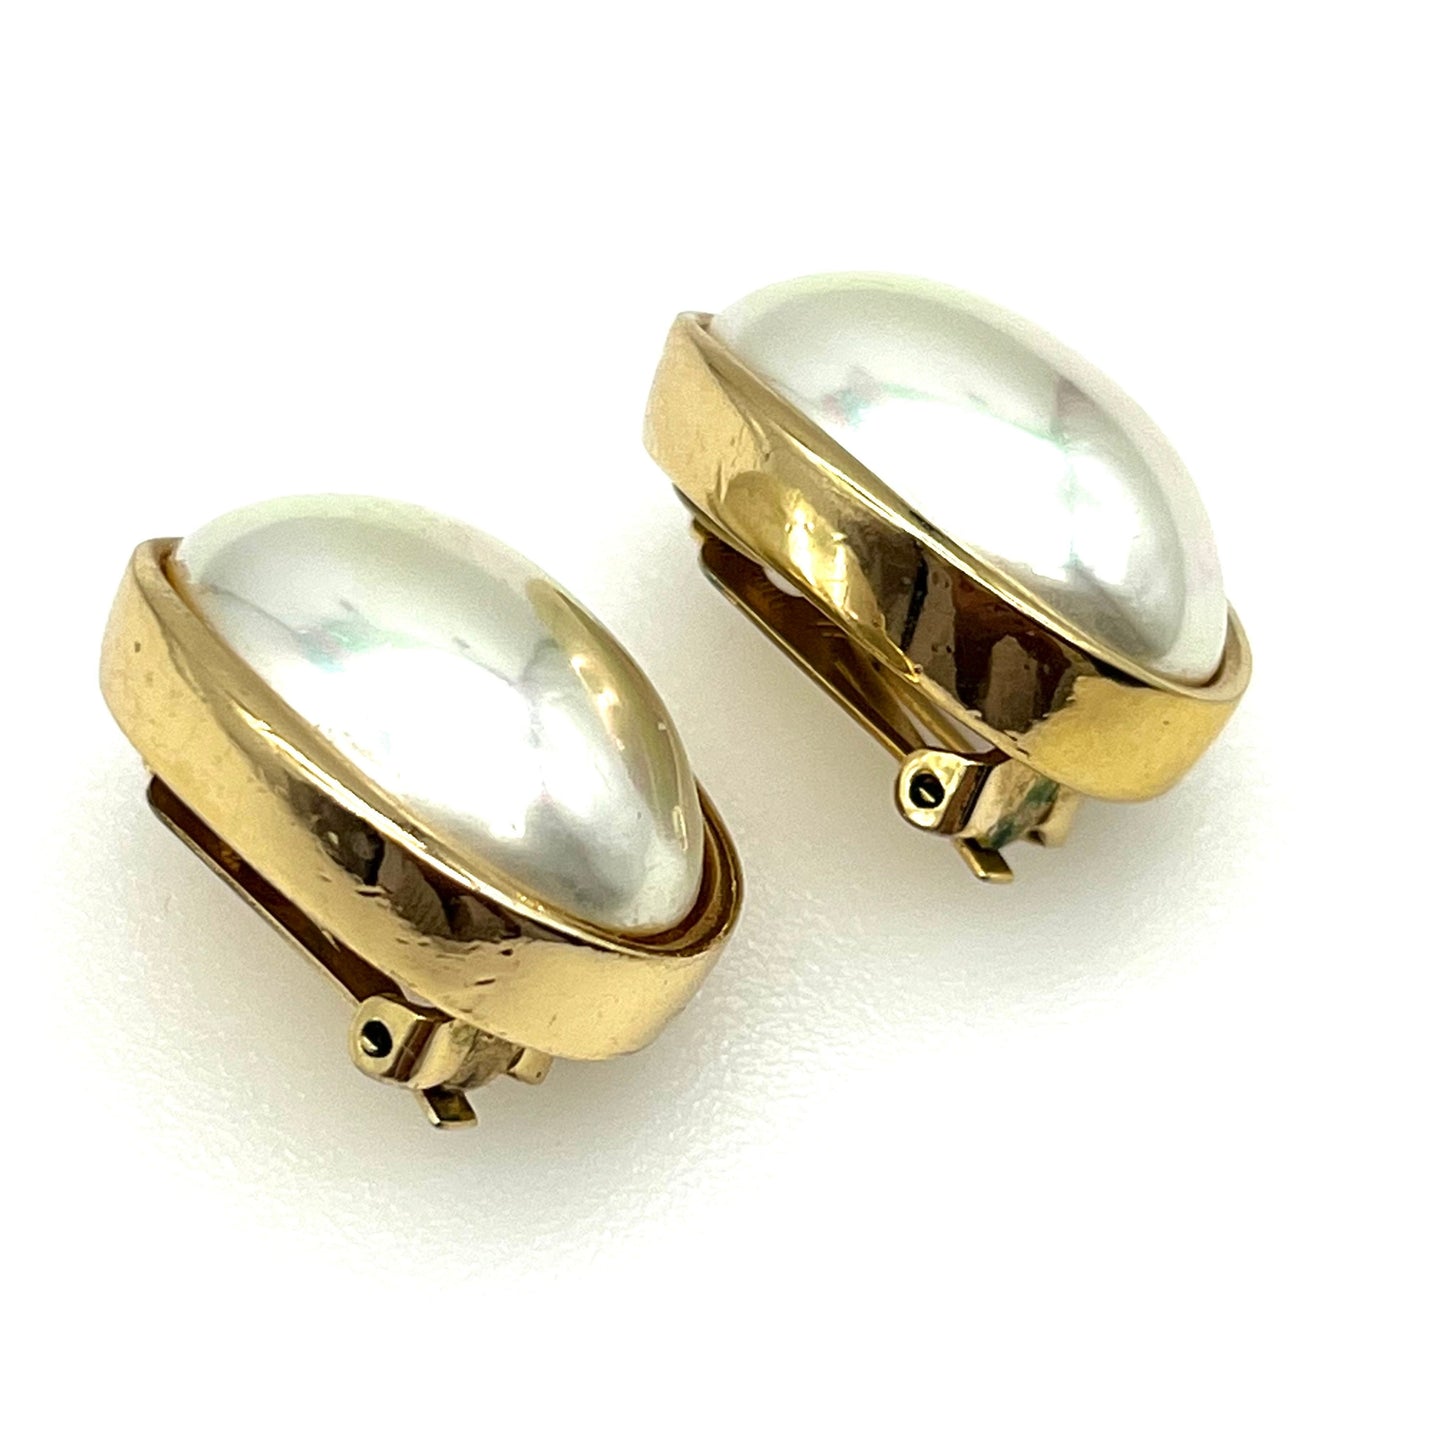 Christian Dior Large Faux Pearl Oval Clip On Earrings